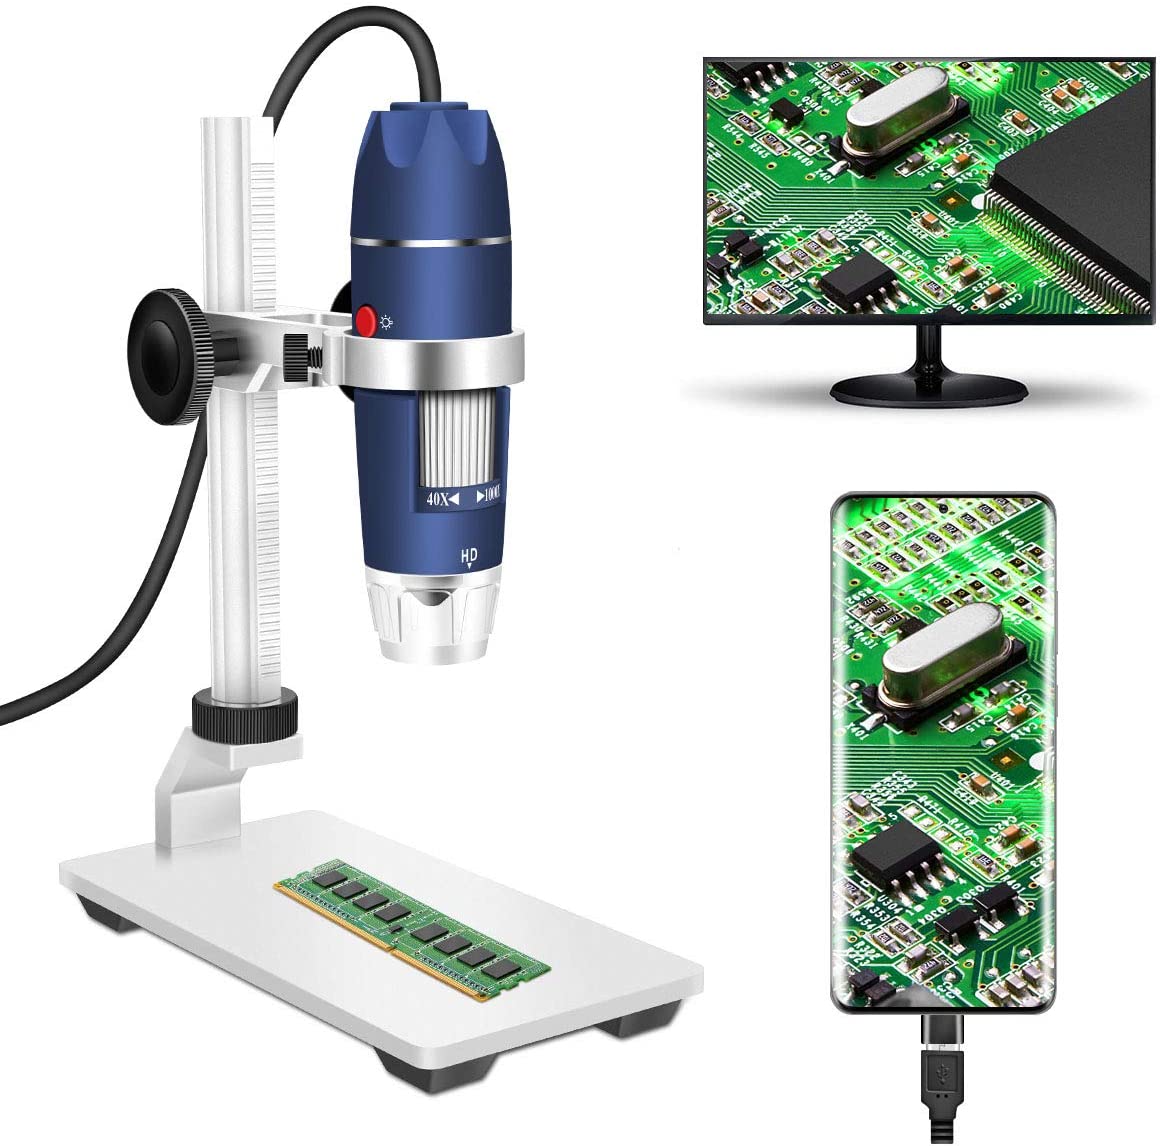 USB Digital Microscope Camera 1000x 1920x1080P Portable Magnification Endoscope Stand for Android Mac Windows Chrome